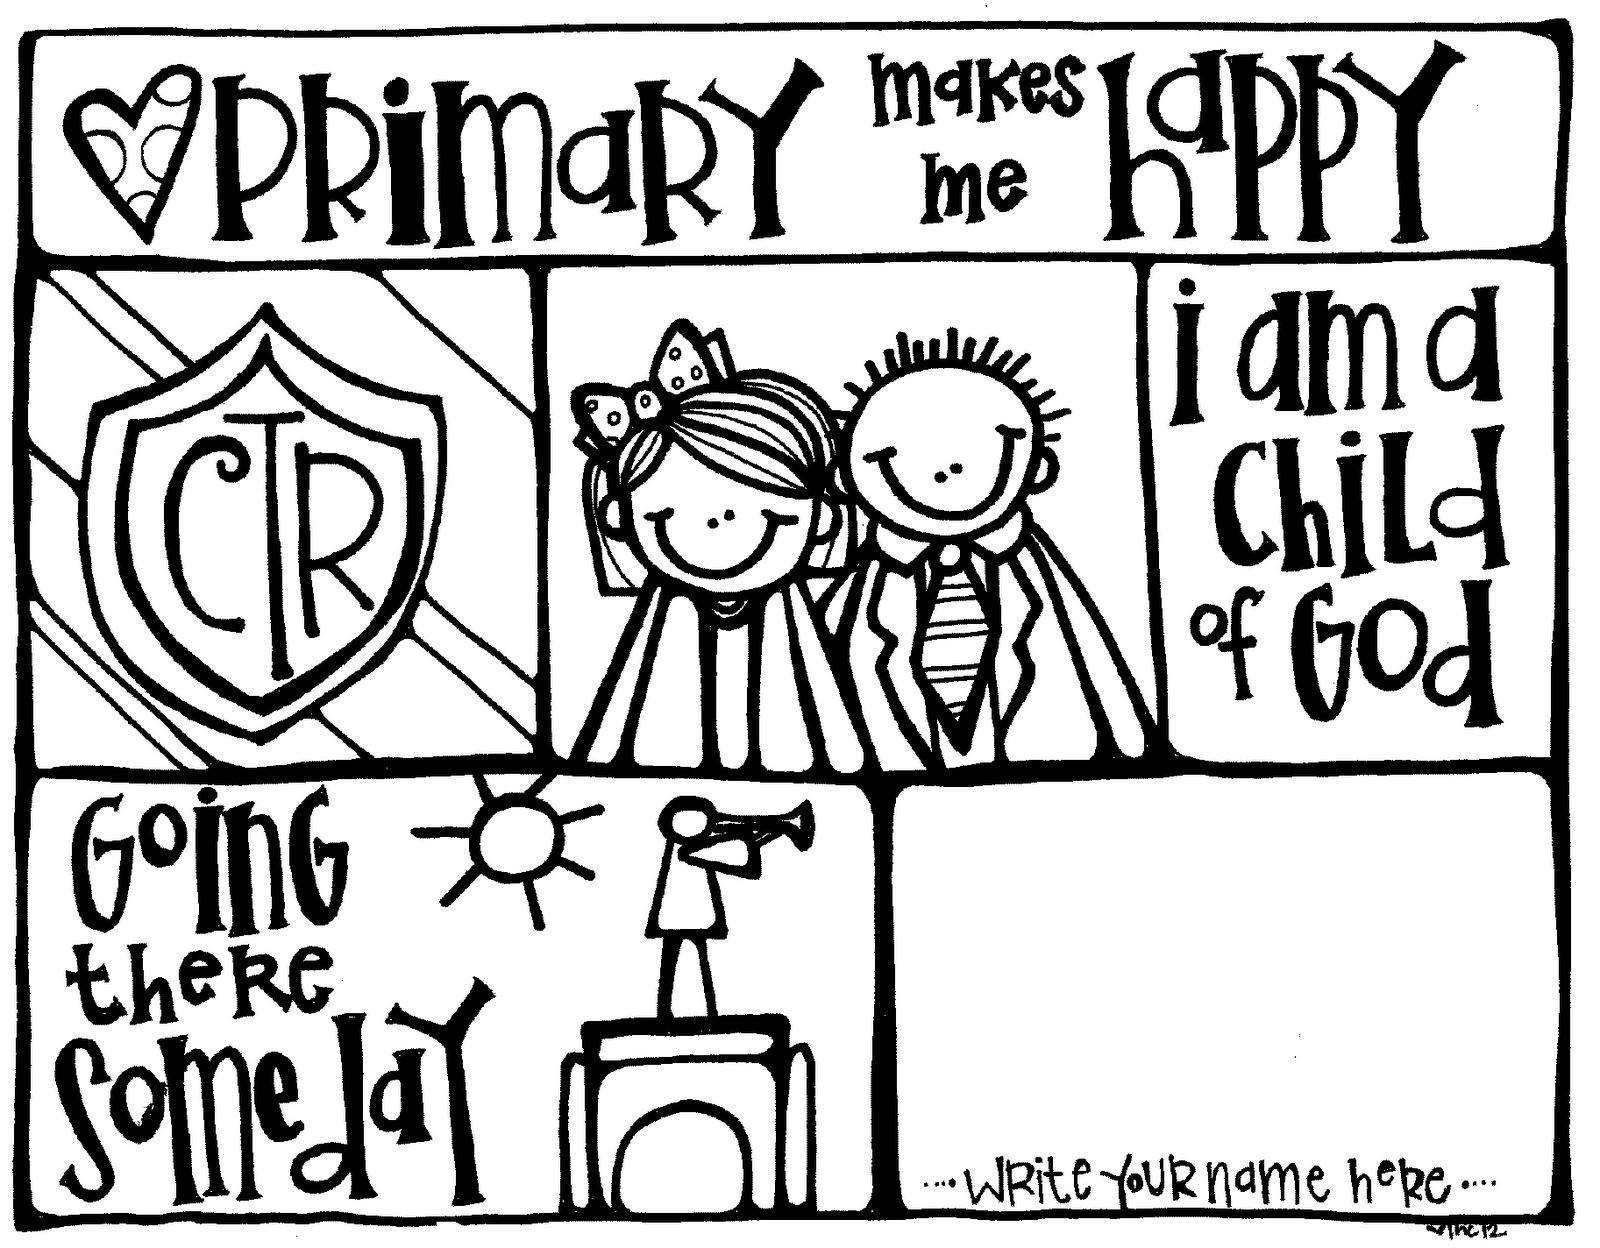 Child Of God Coloring Page
 I Am A Child God Coloring Page Part 1